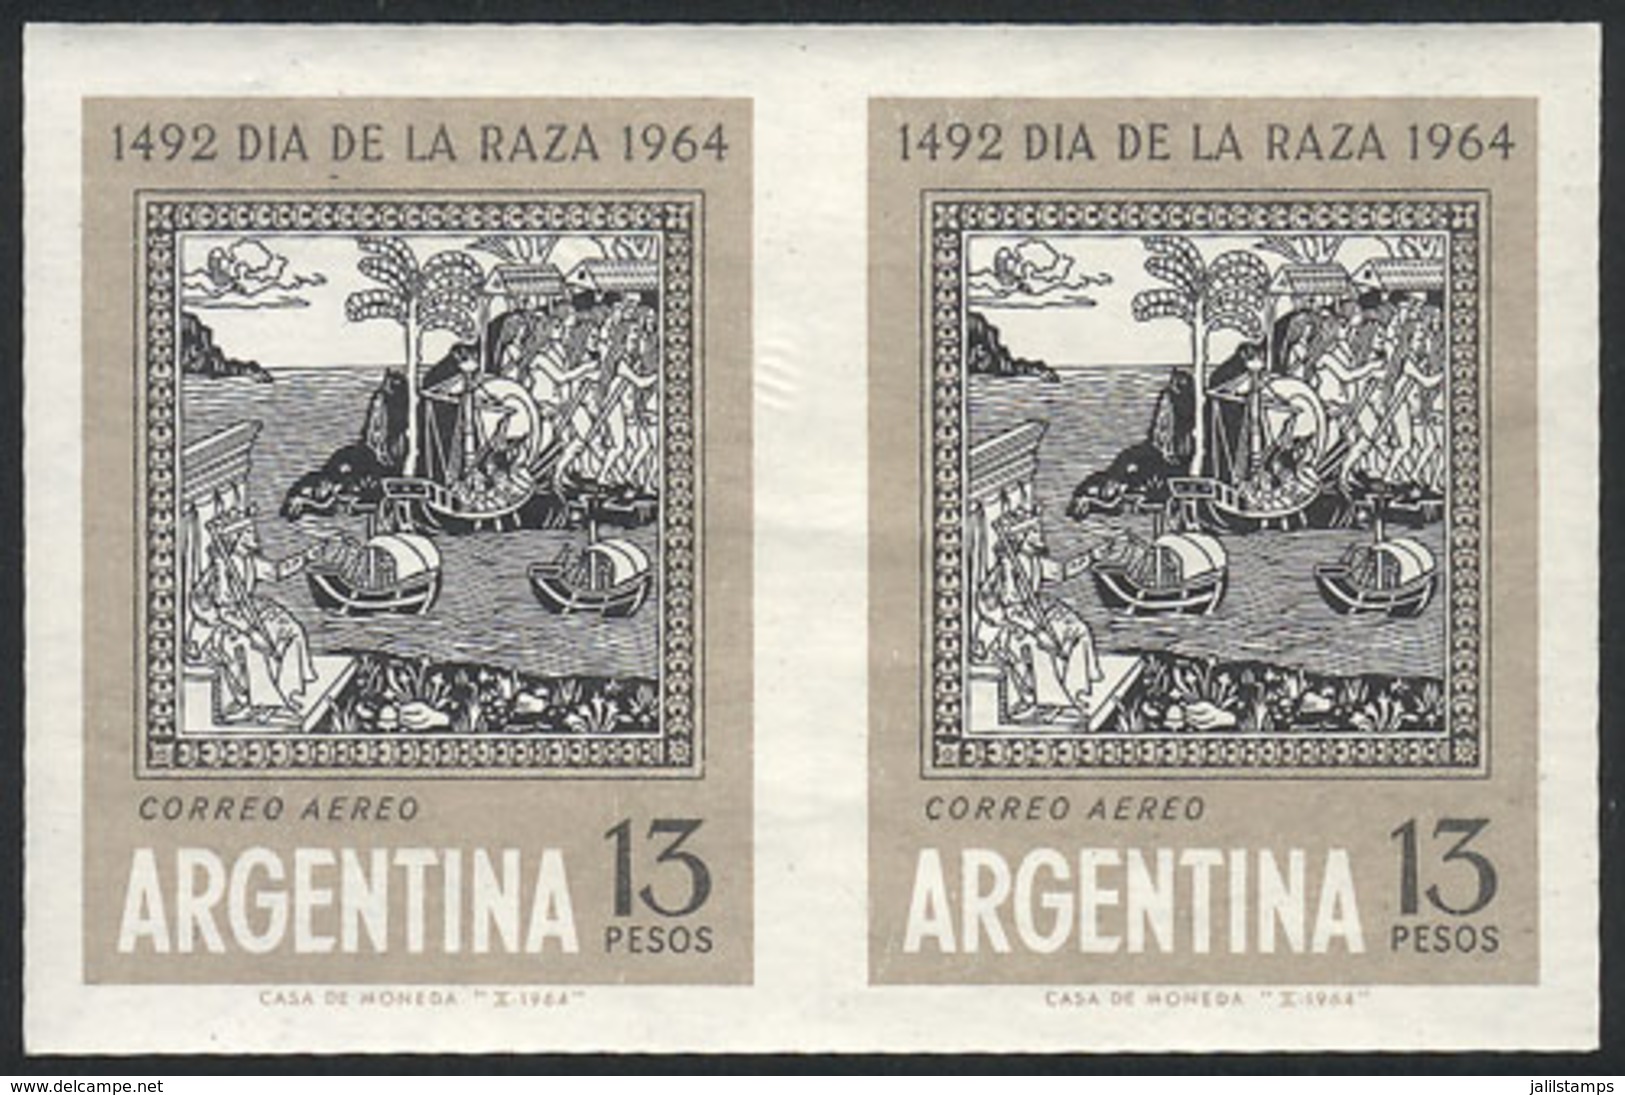 ARGENTINA: GJ.1287P, 1964 Discovery Of America, IMPERFORATE PAIR, VF Quality! - Airmail